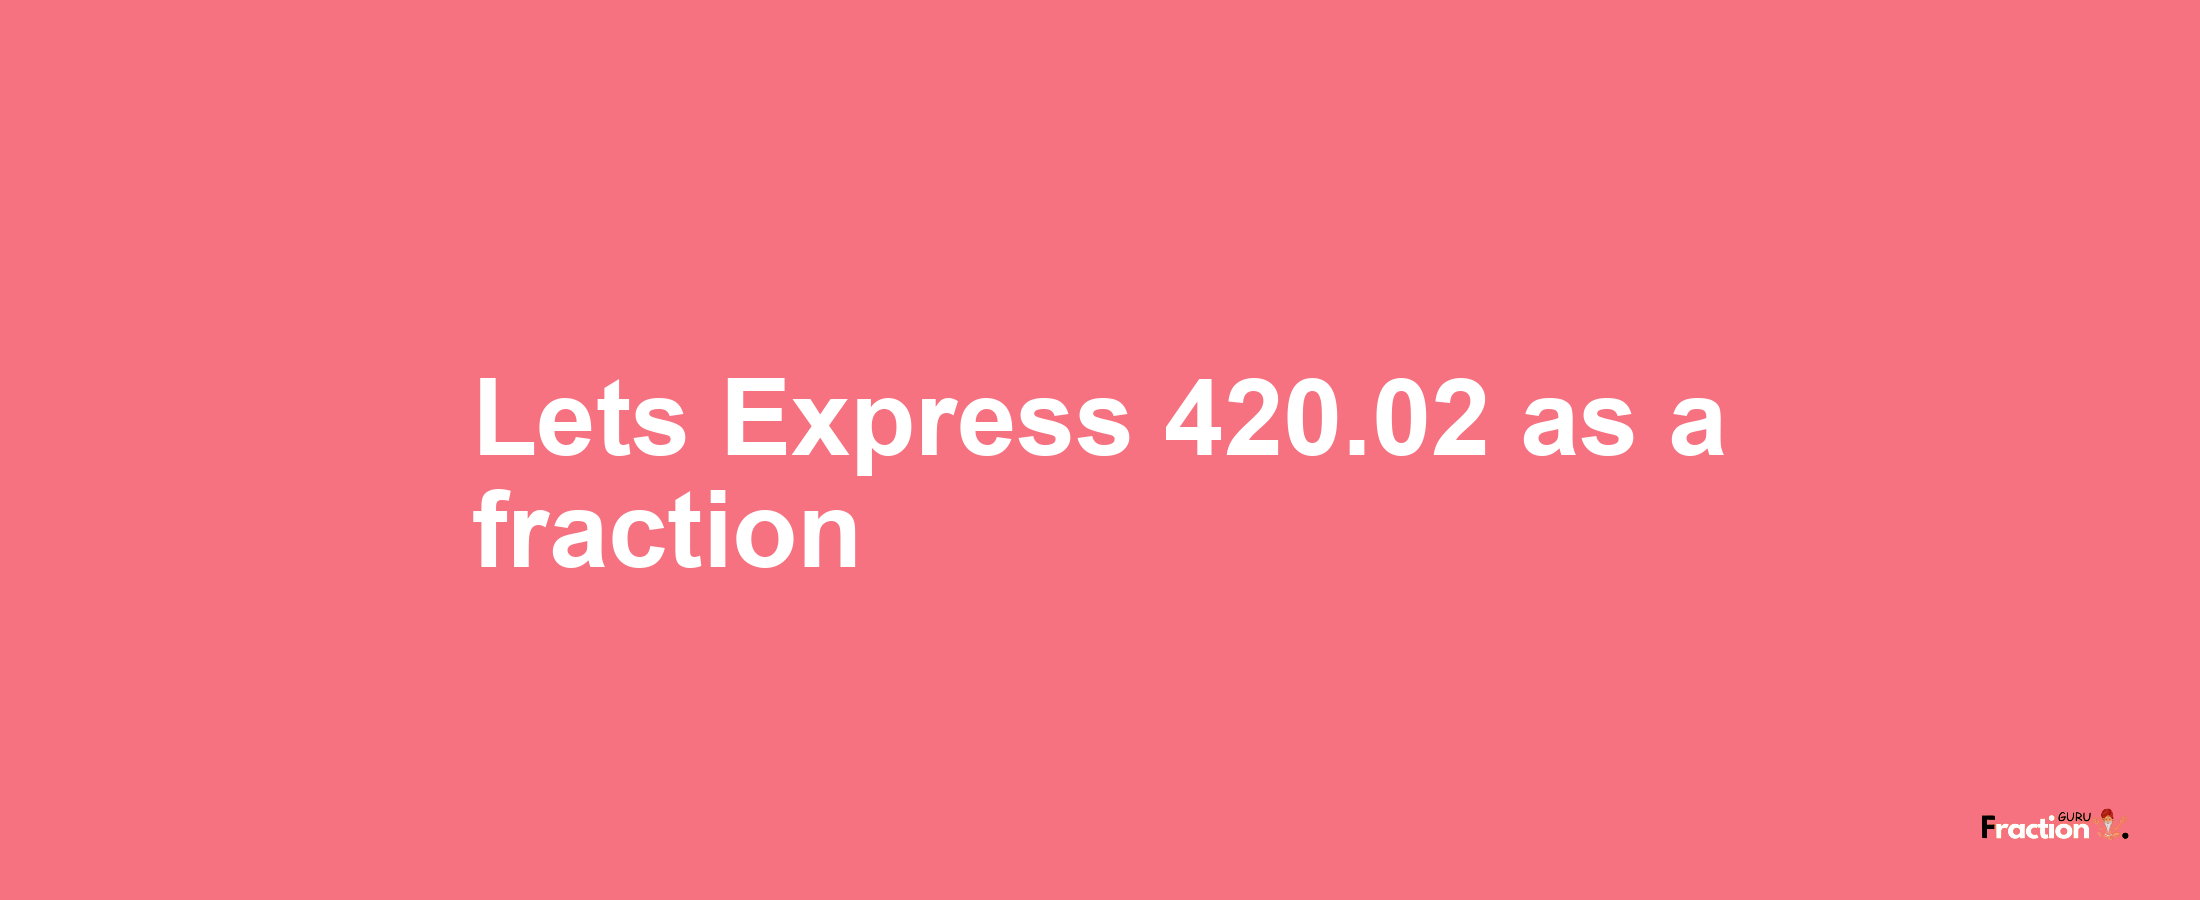 Lets Express 420.02 as afraction